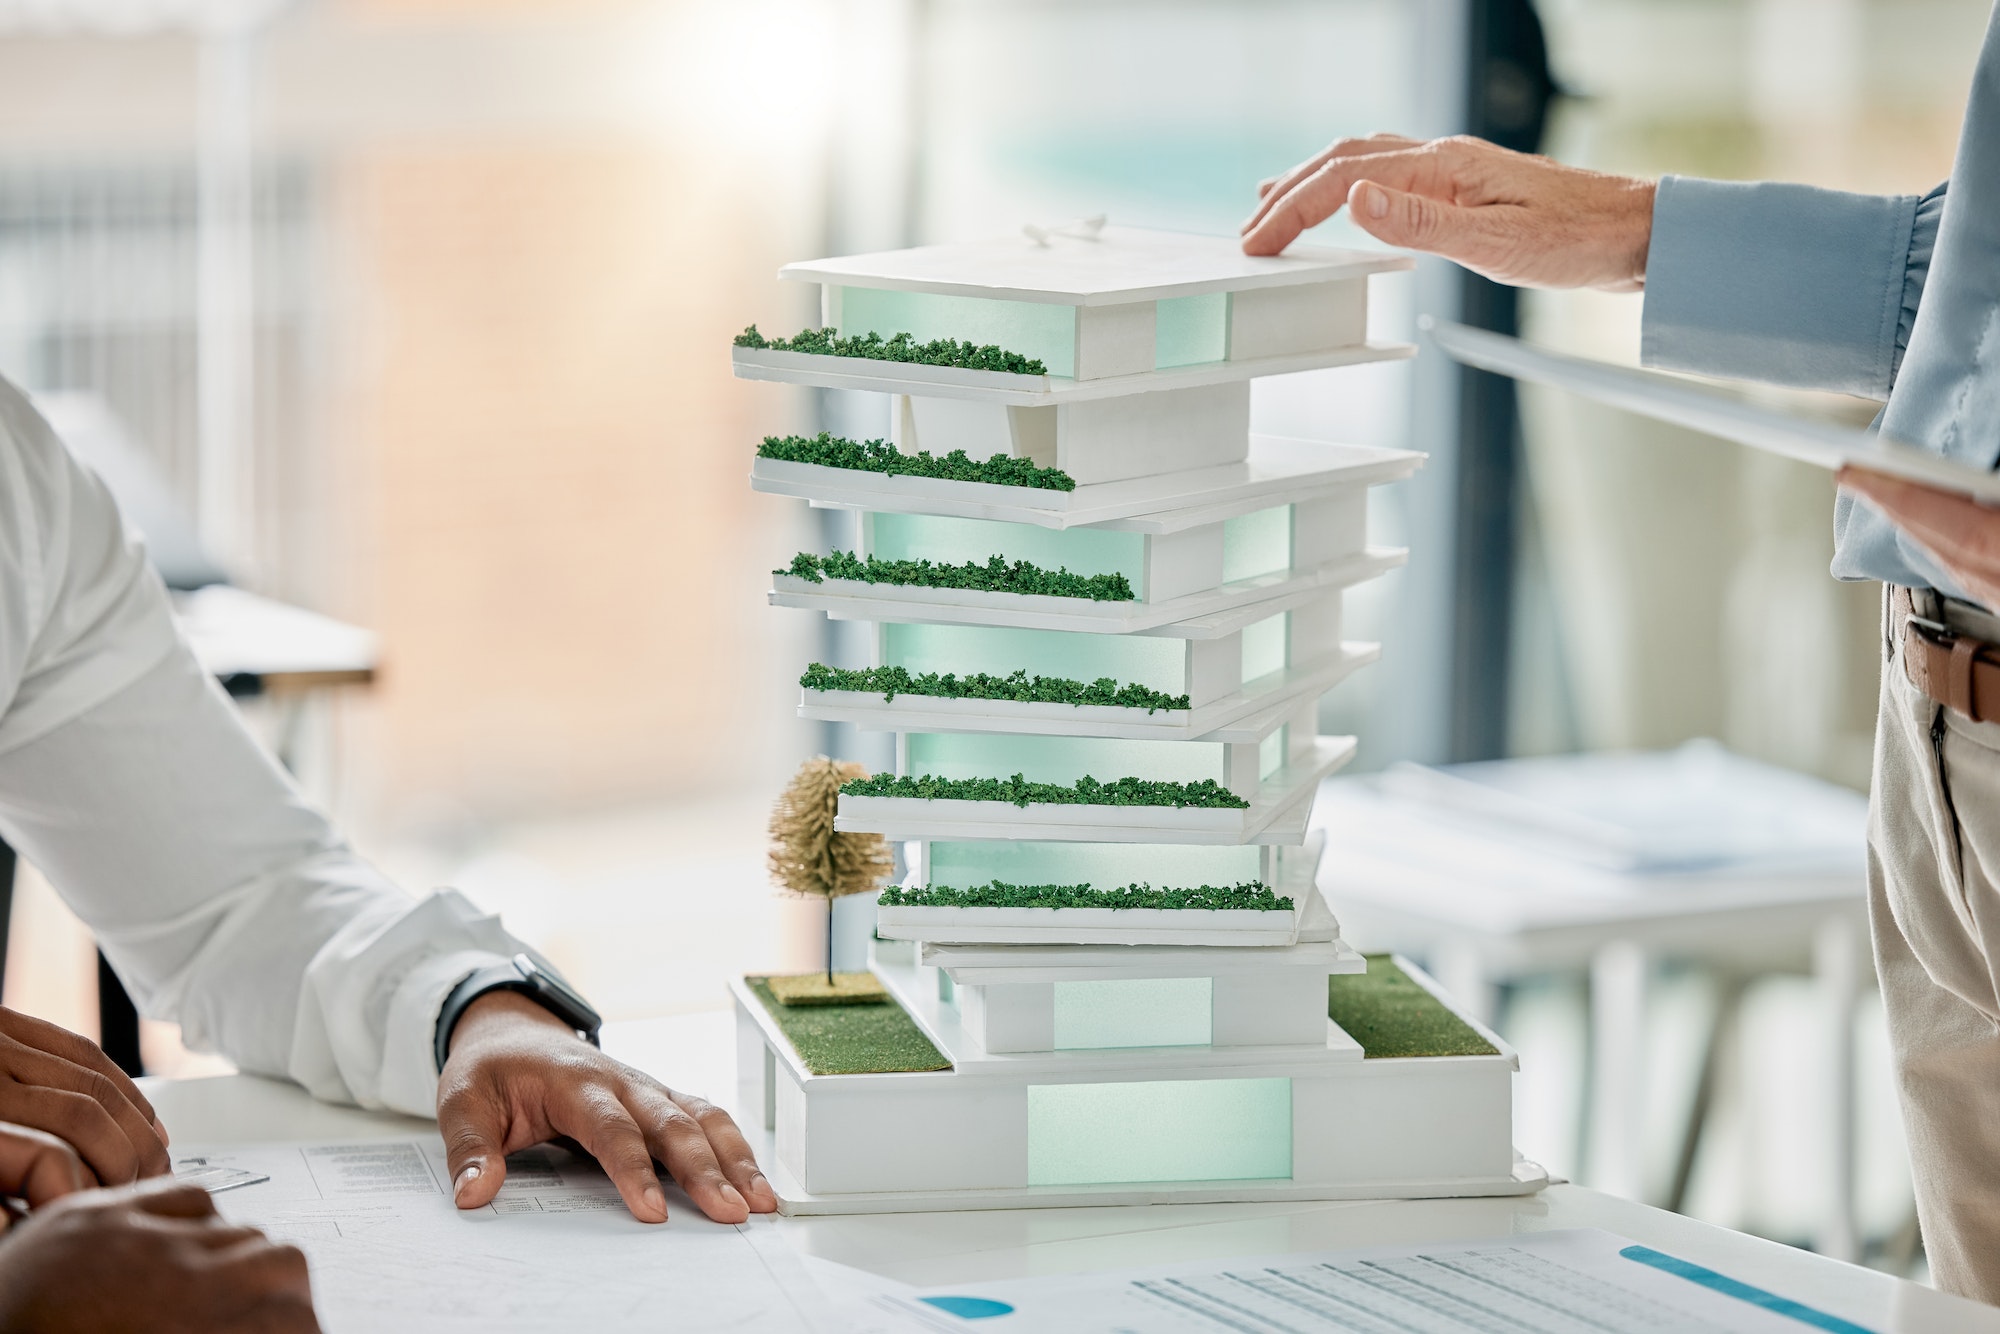 Building model, diversity and hands of architect working on real estate development, architecture e